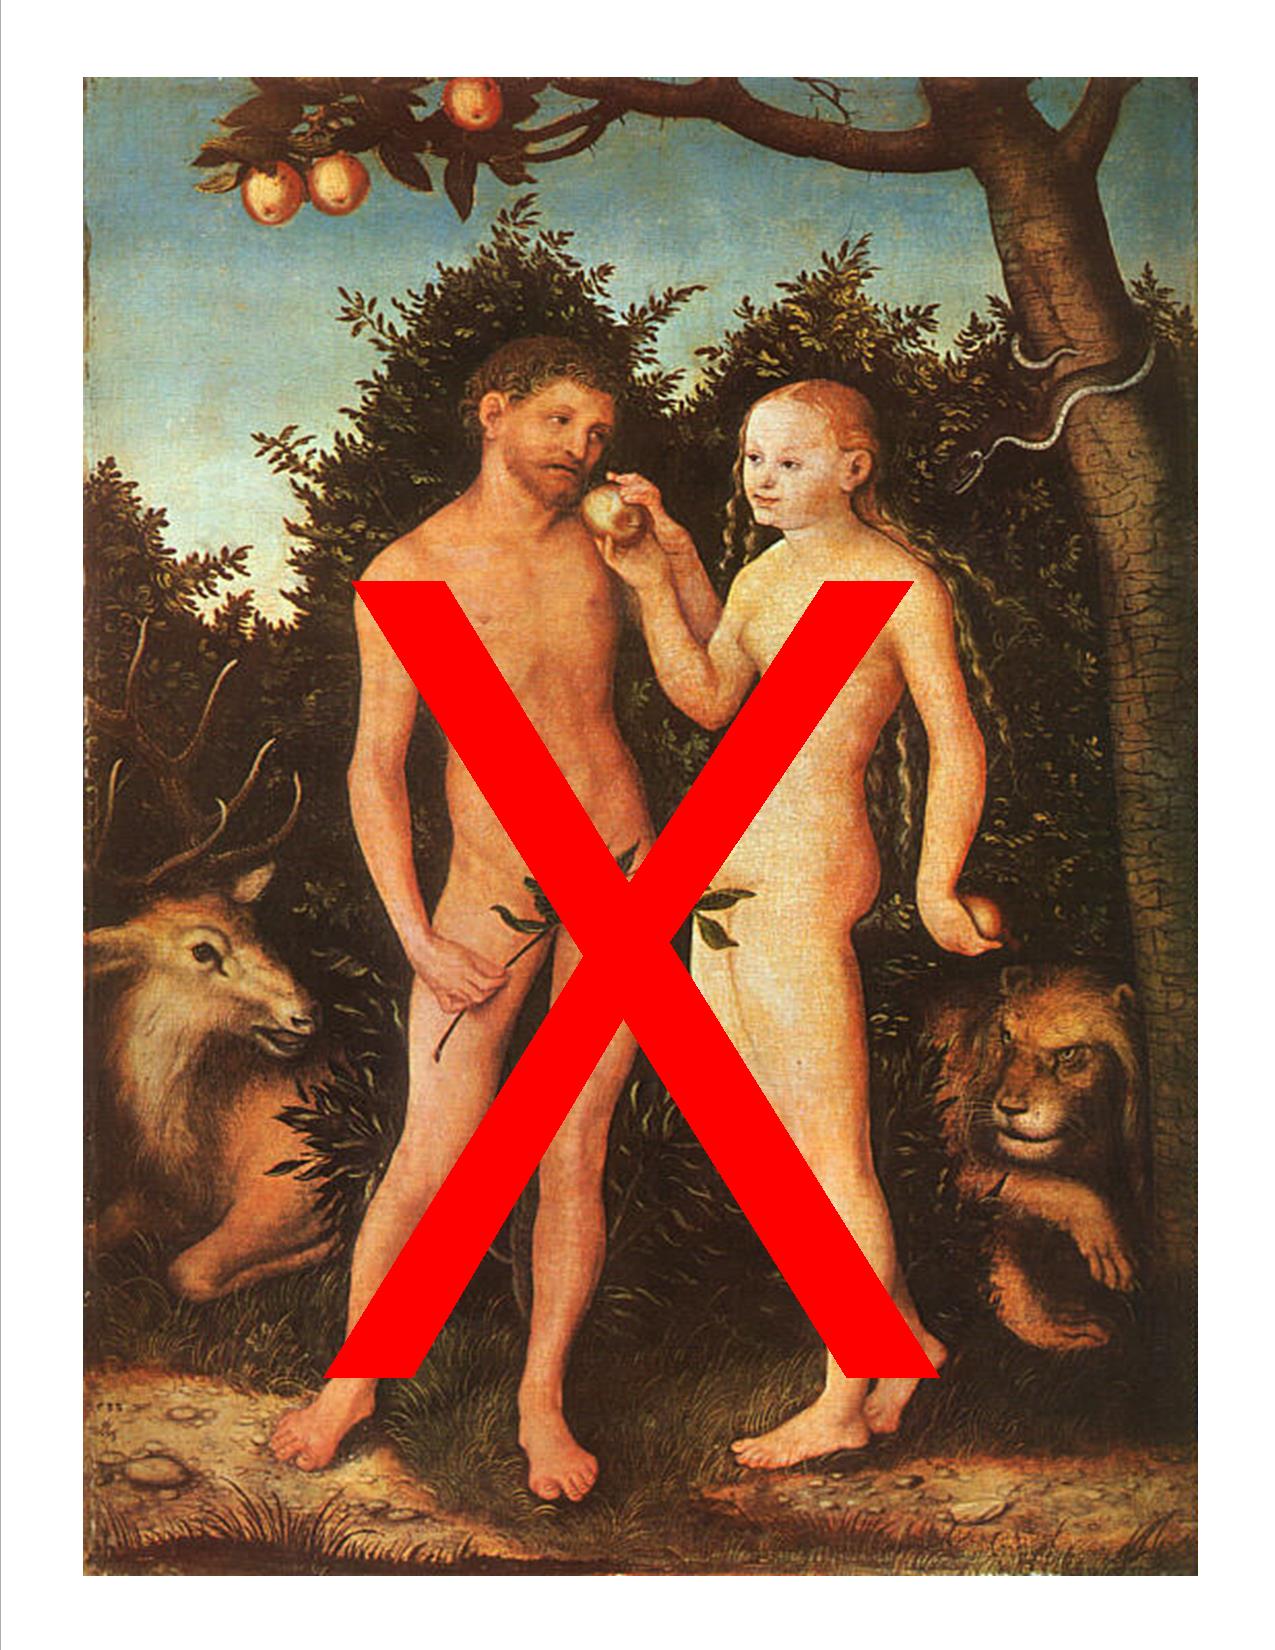 You're Not Crazy: Exploding the Myth of Adam and Eve. elephant journal...